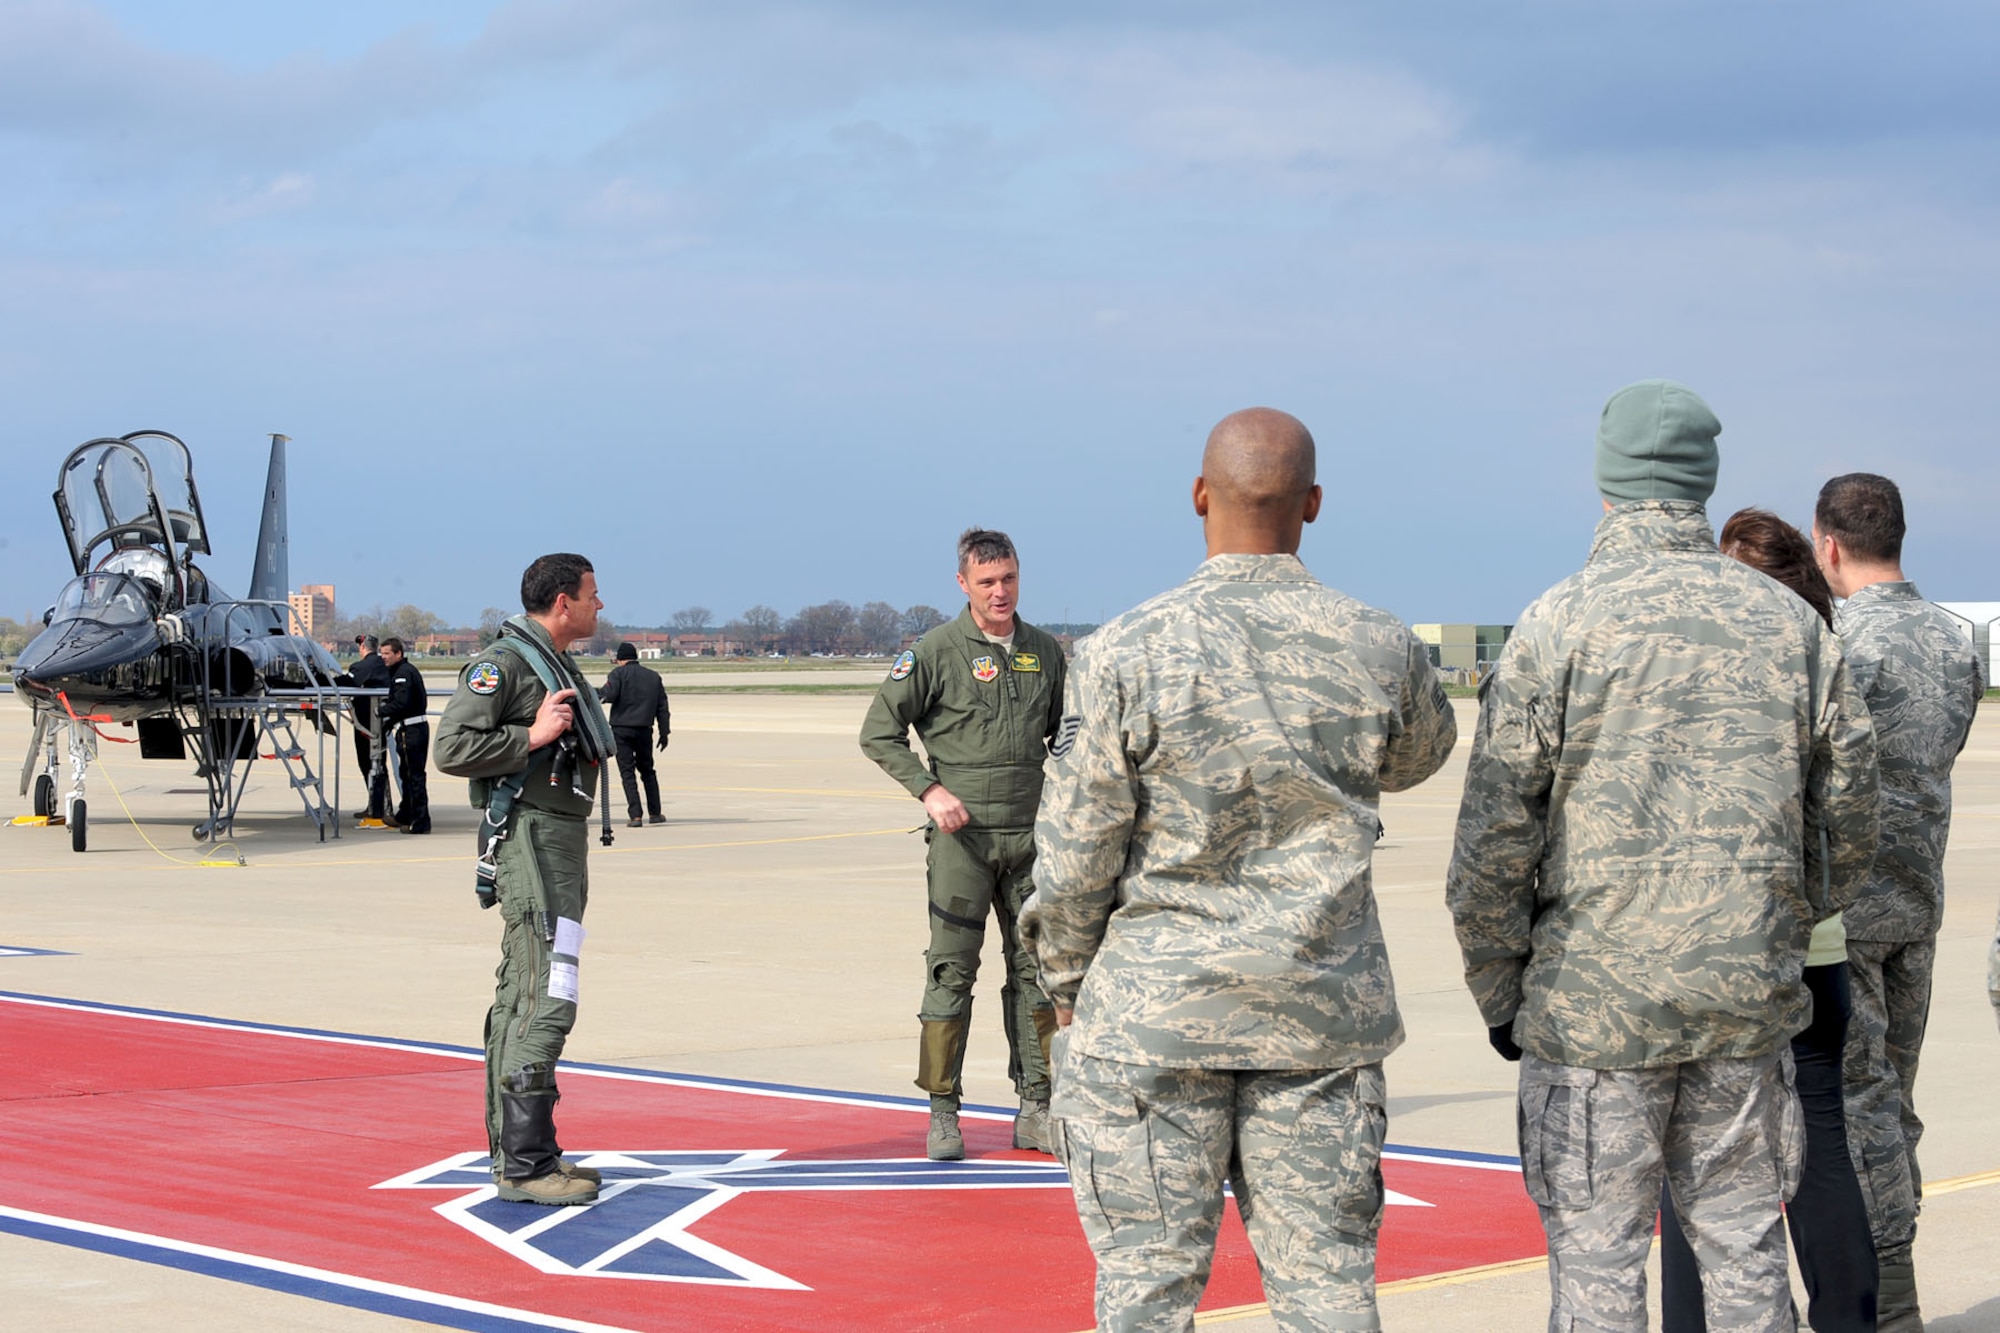 Col. Matthew Molloy, 1st Fighter Wing Commander, and Kevin Mastin, 1st FW vice commander, address members of Team Langley after delivering the T-38 Talon to Langley Air Force Base, Va., April 1, 2011. The T-38, from Holloman AFB, N.M., is TDY here for six months to help train 1st FW pilots and prepare them for when it is permanently stationed here. (U.S. Air Force photo by Staff Sgt. Ashley Hawkins/Released)